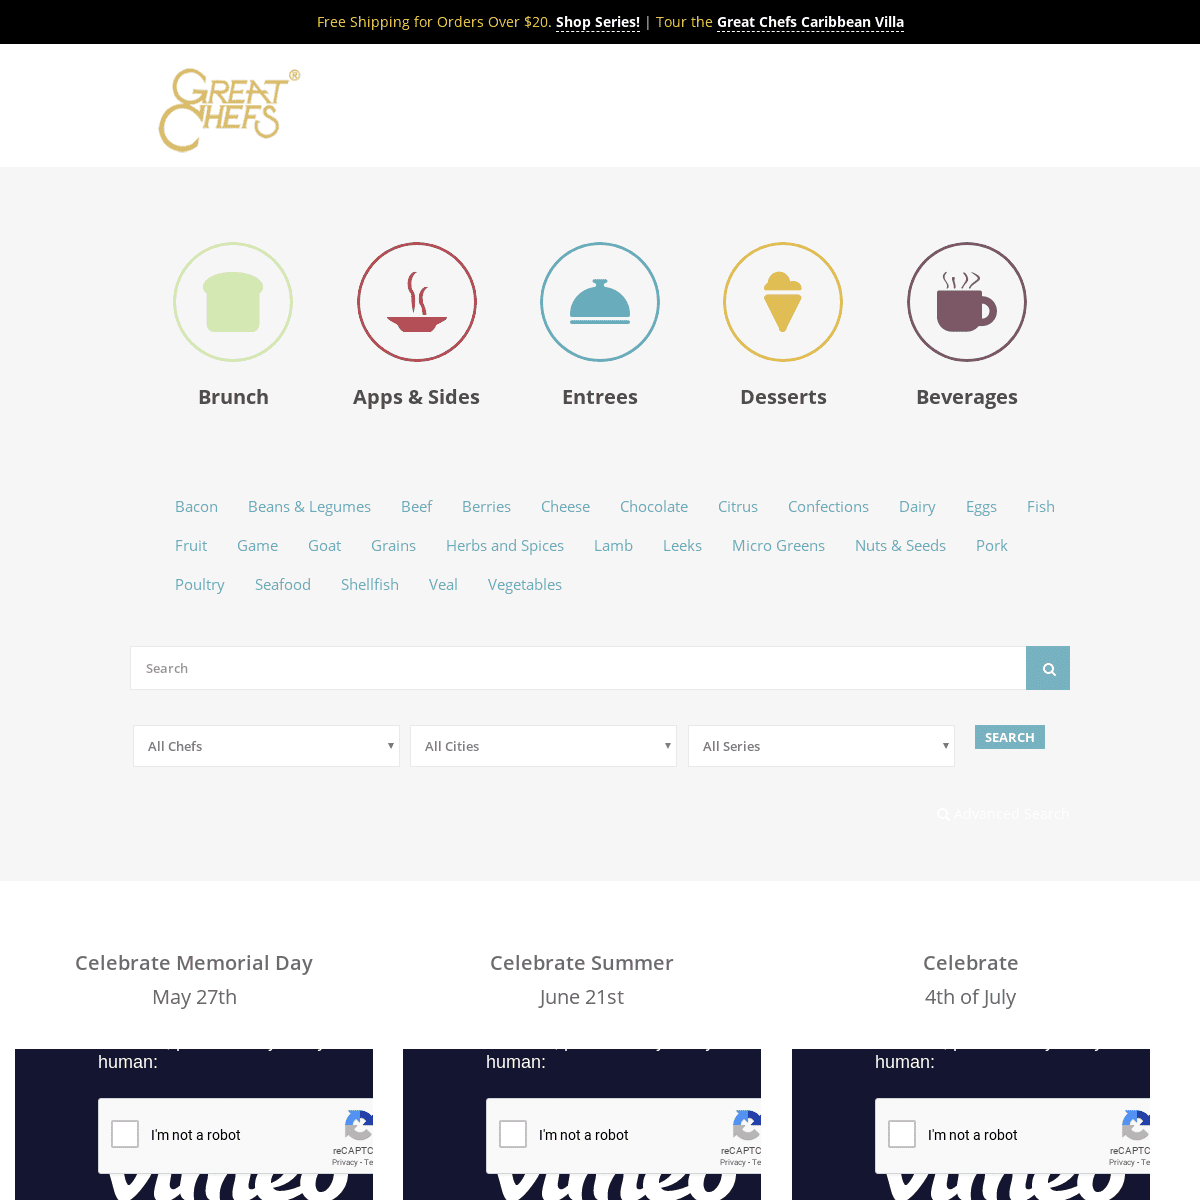 A complete backup of greatchefs.com